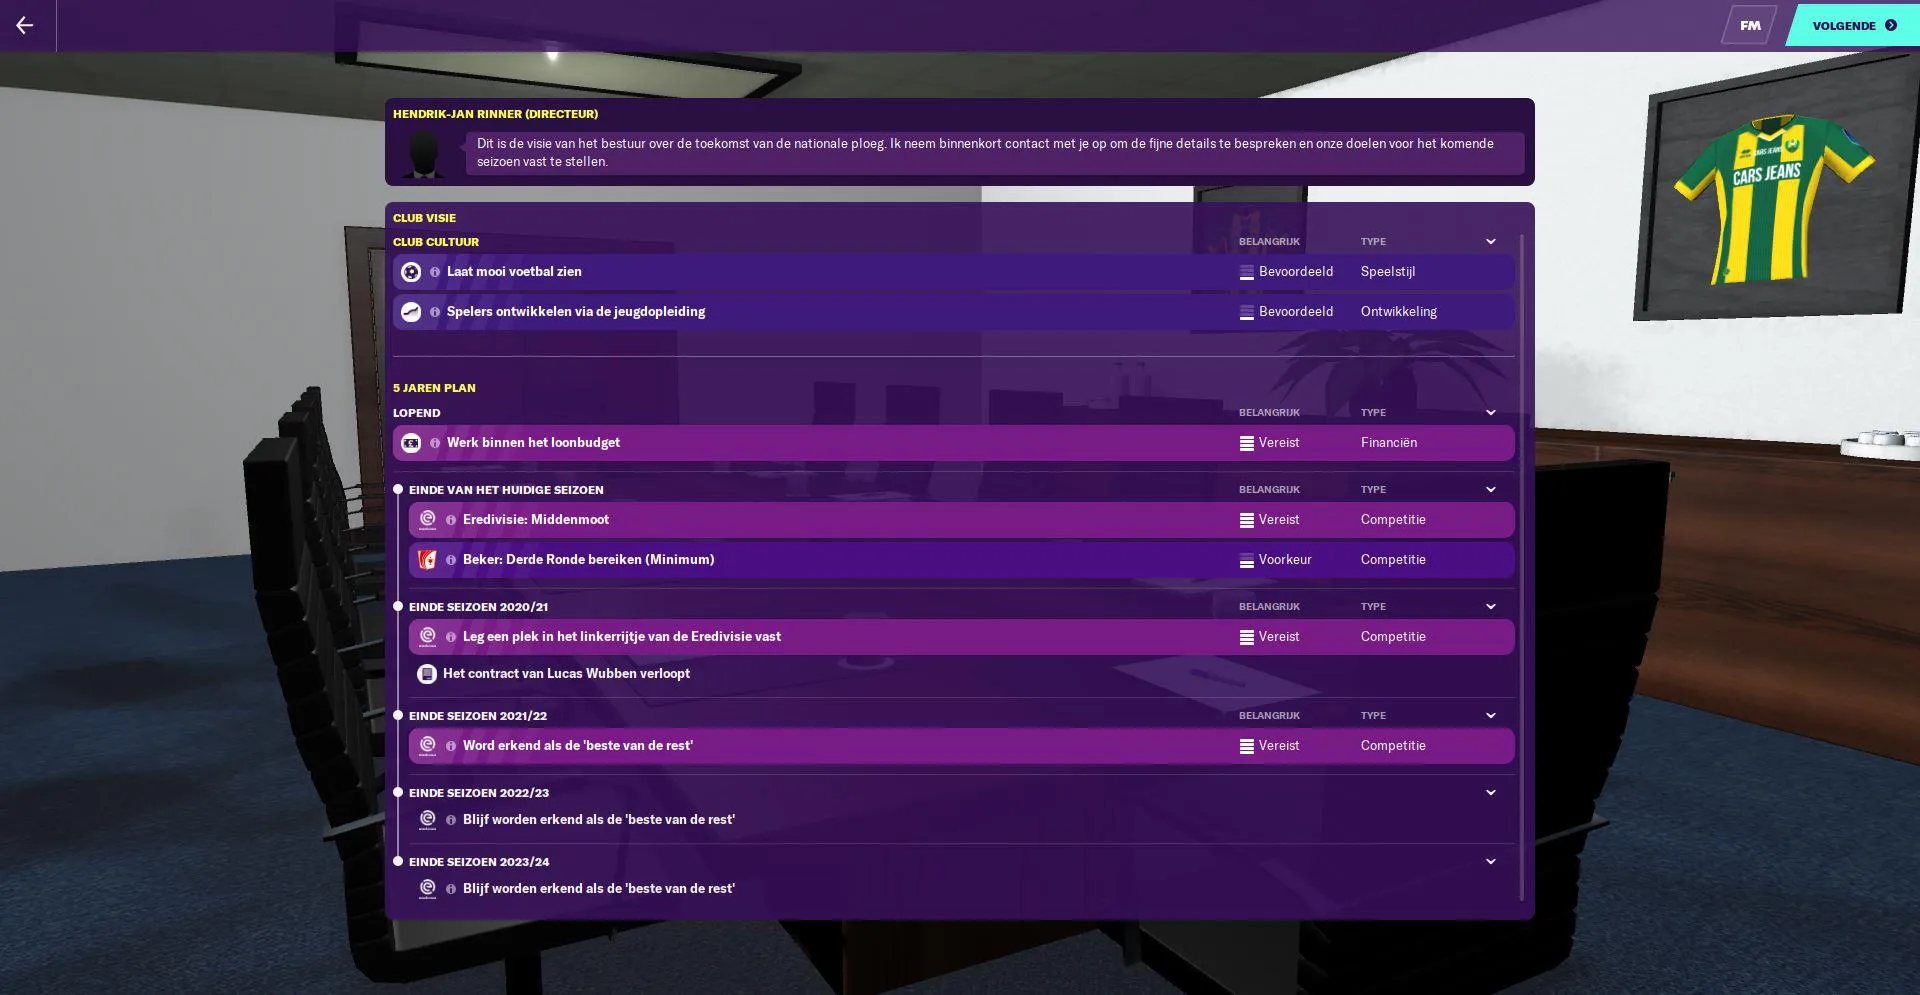 football manager 2020 review clubvisie